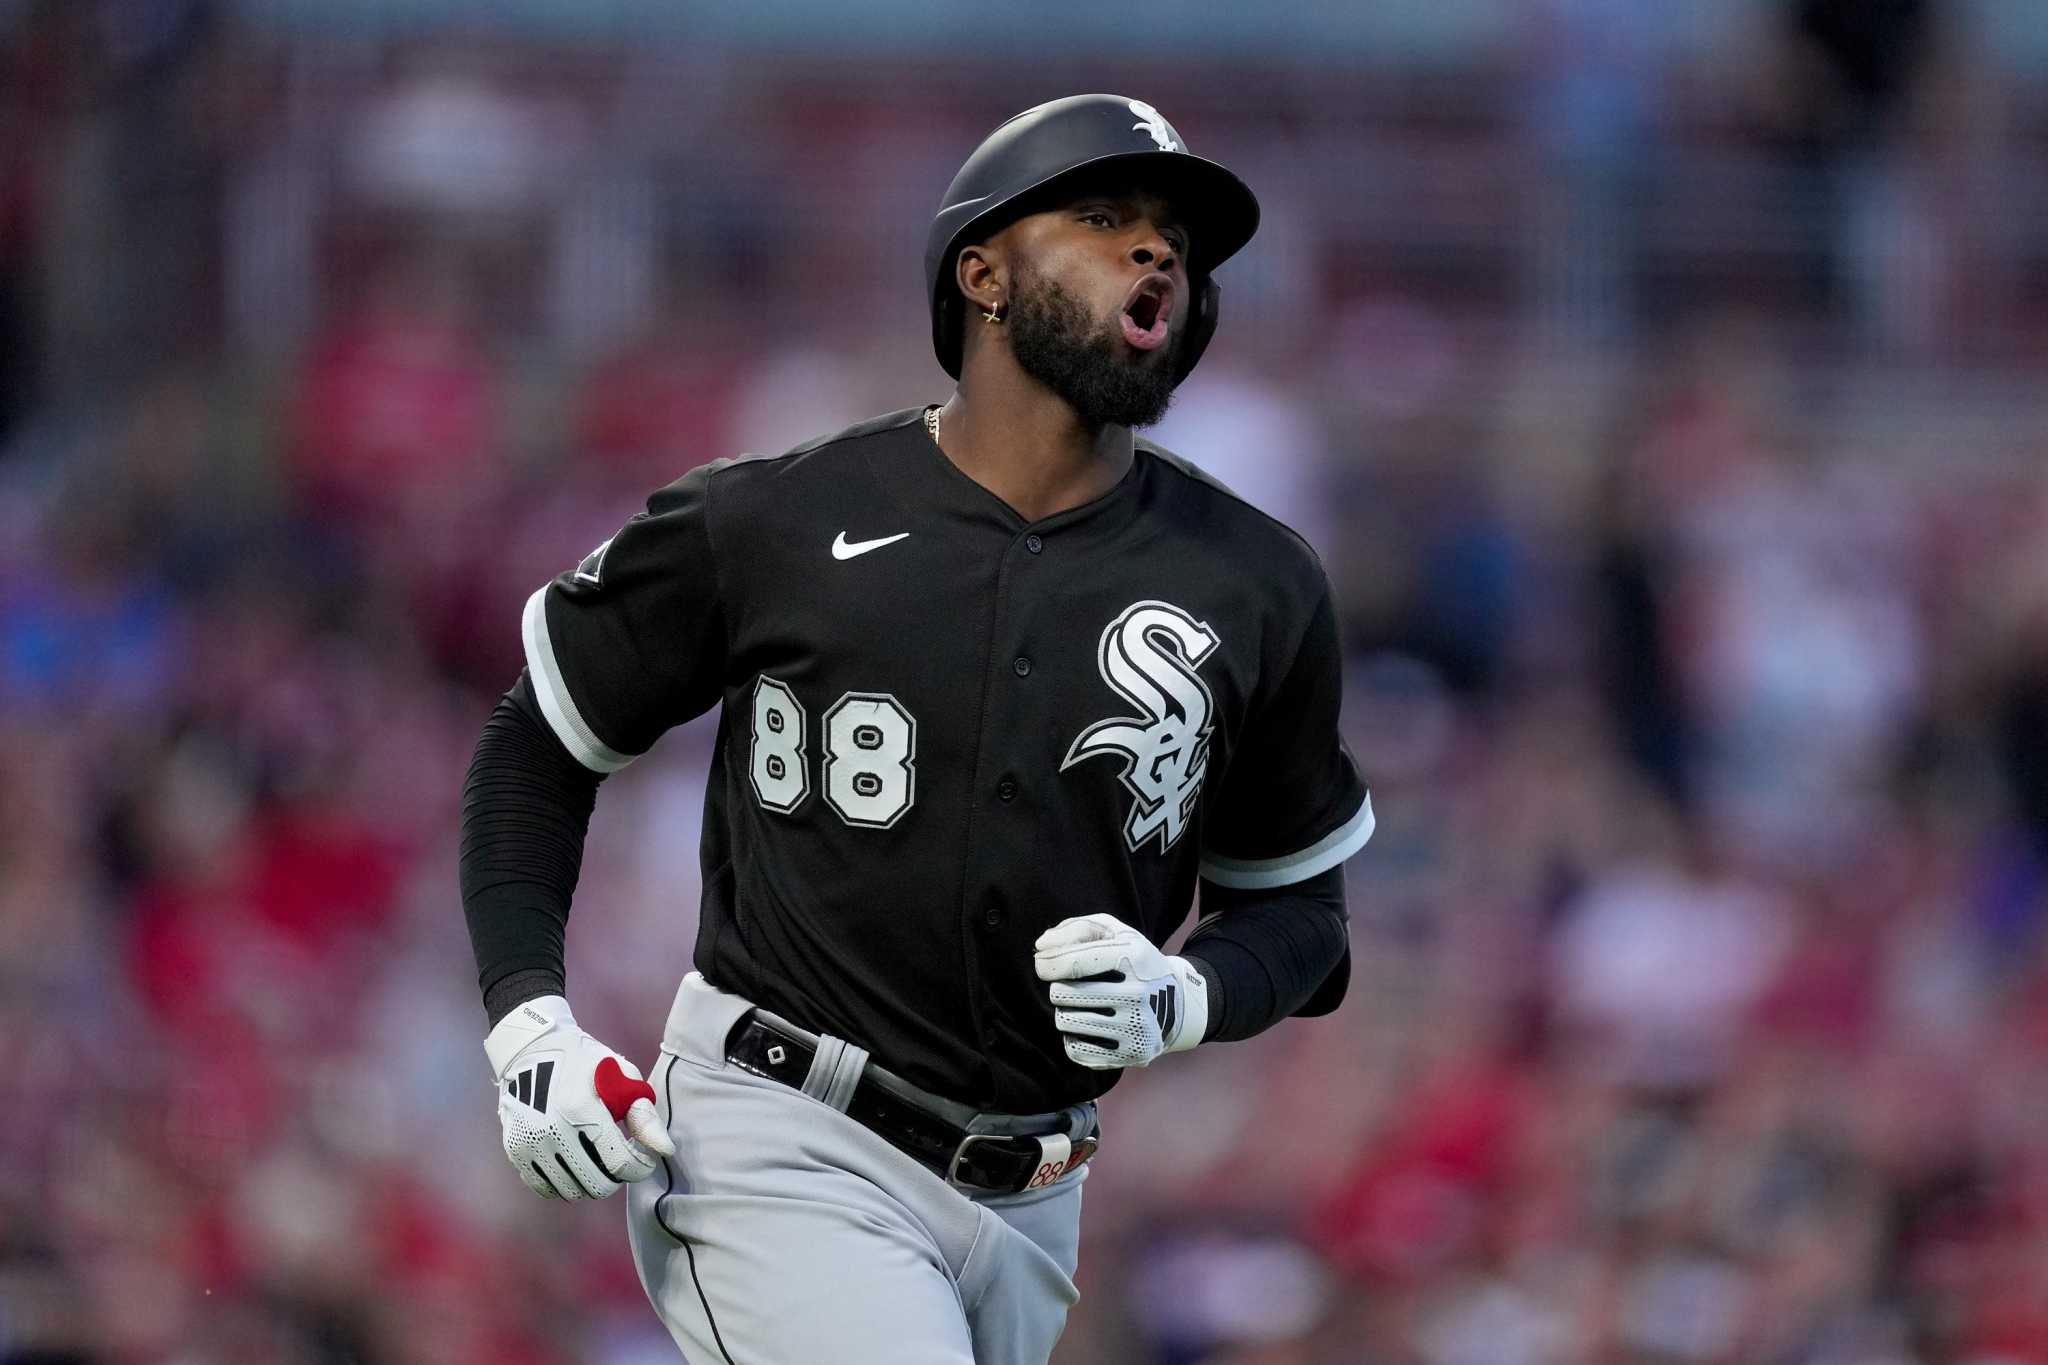 On deck: Astros at Chicago White Sox